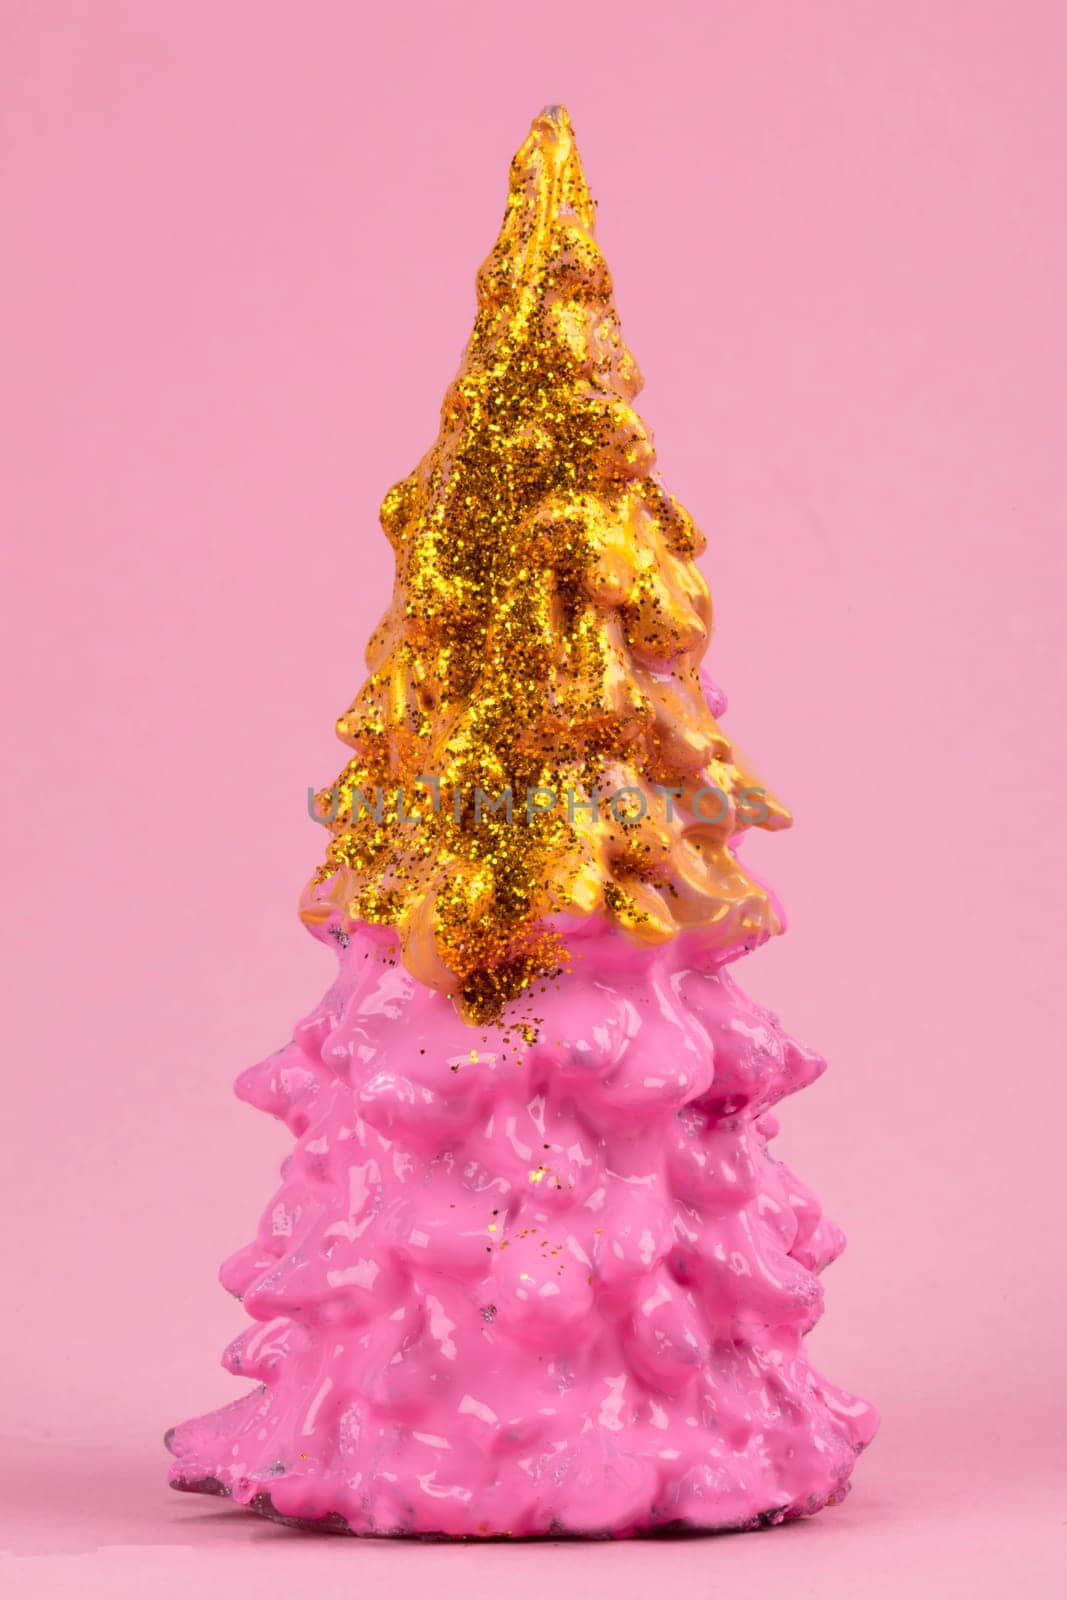 Christmas composition. Pink Christmas tree with gold on a pink background. Happy Holidays. minimal new year concept.